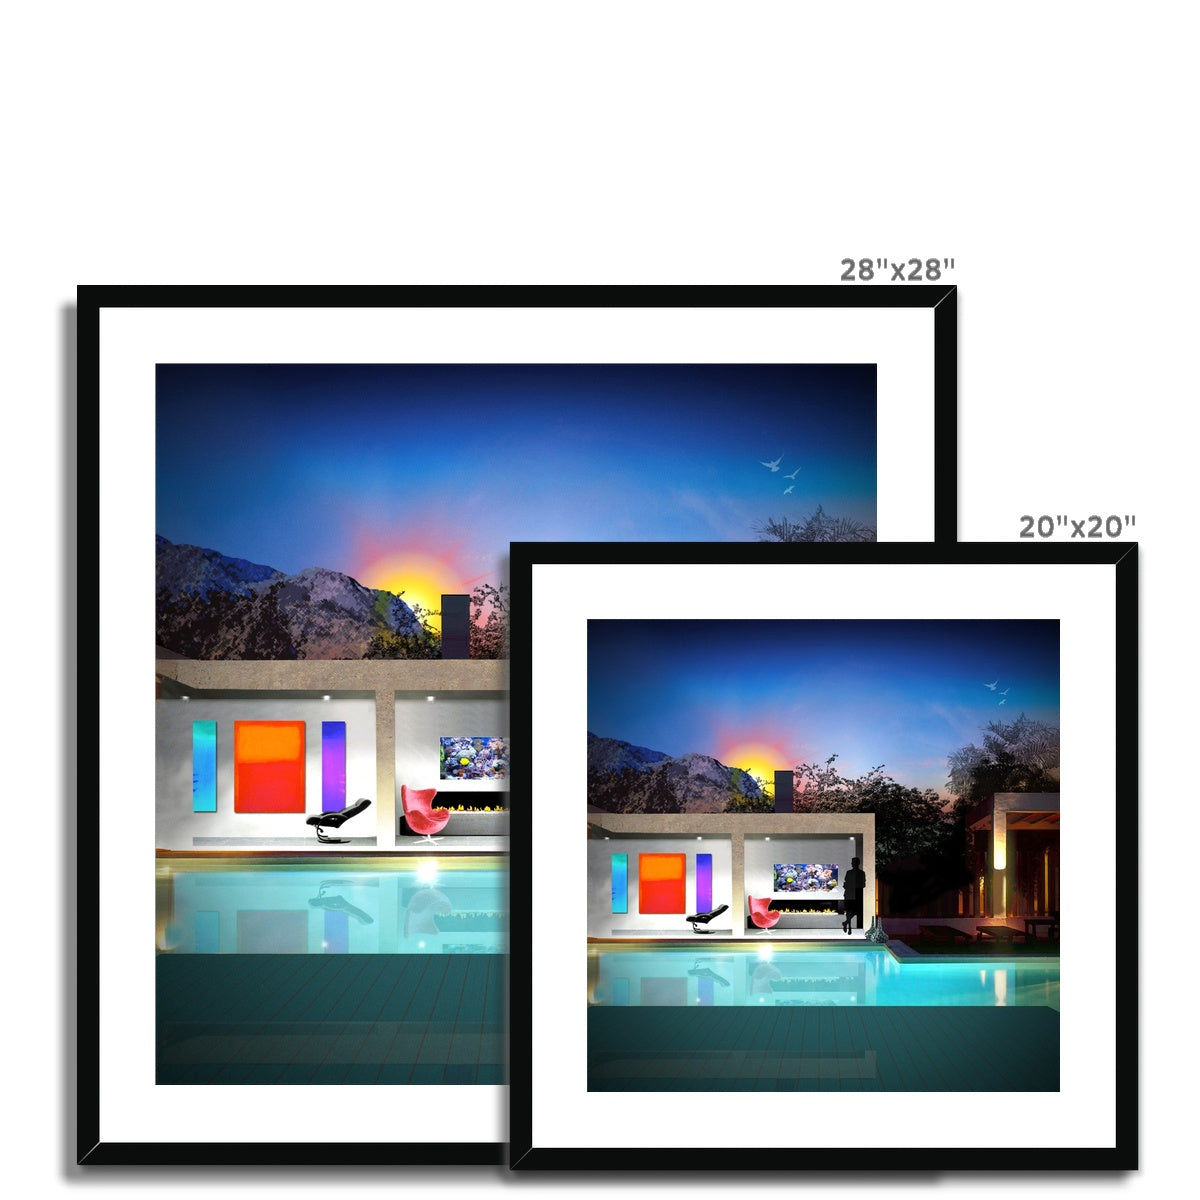 Comfort Zone Swimming Pool Framed & Mounted Print